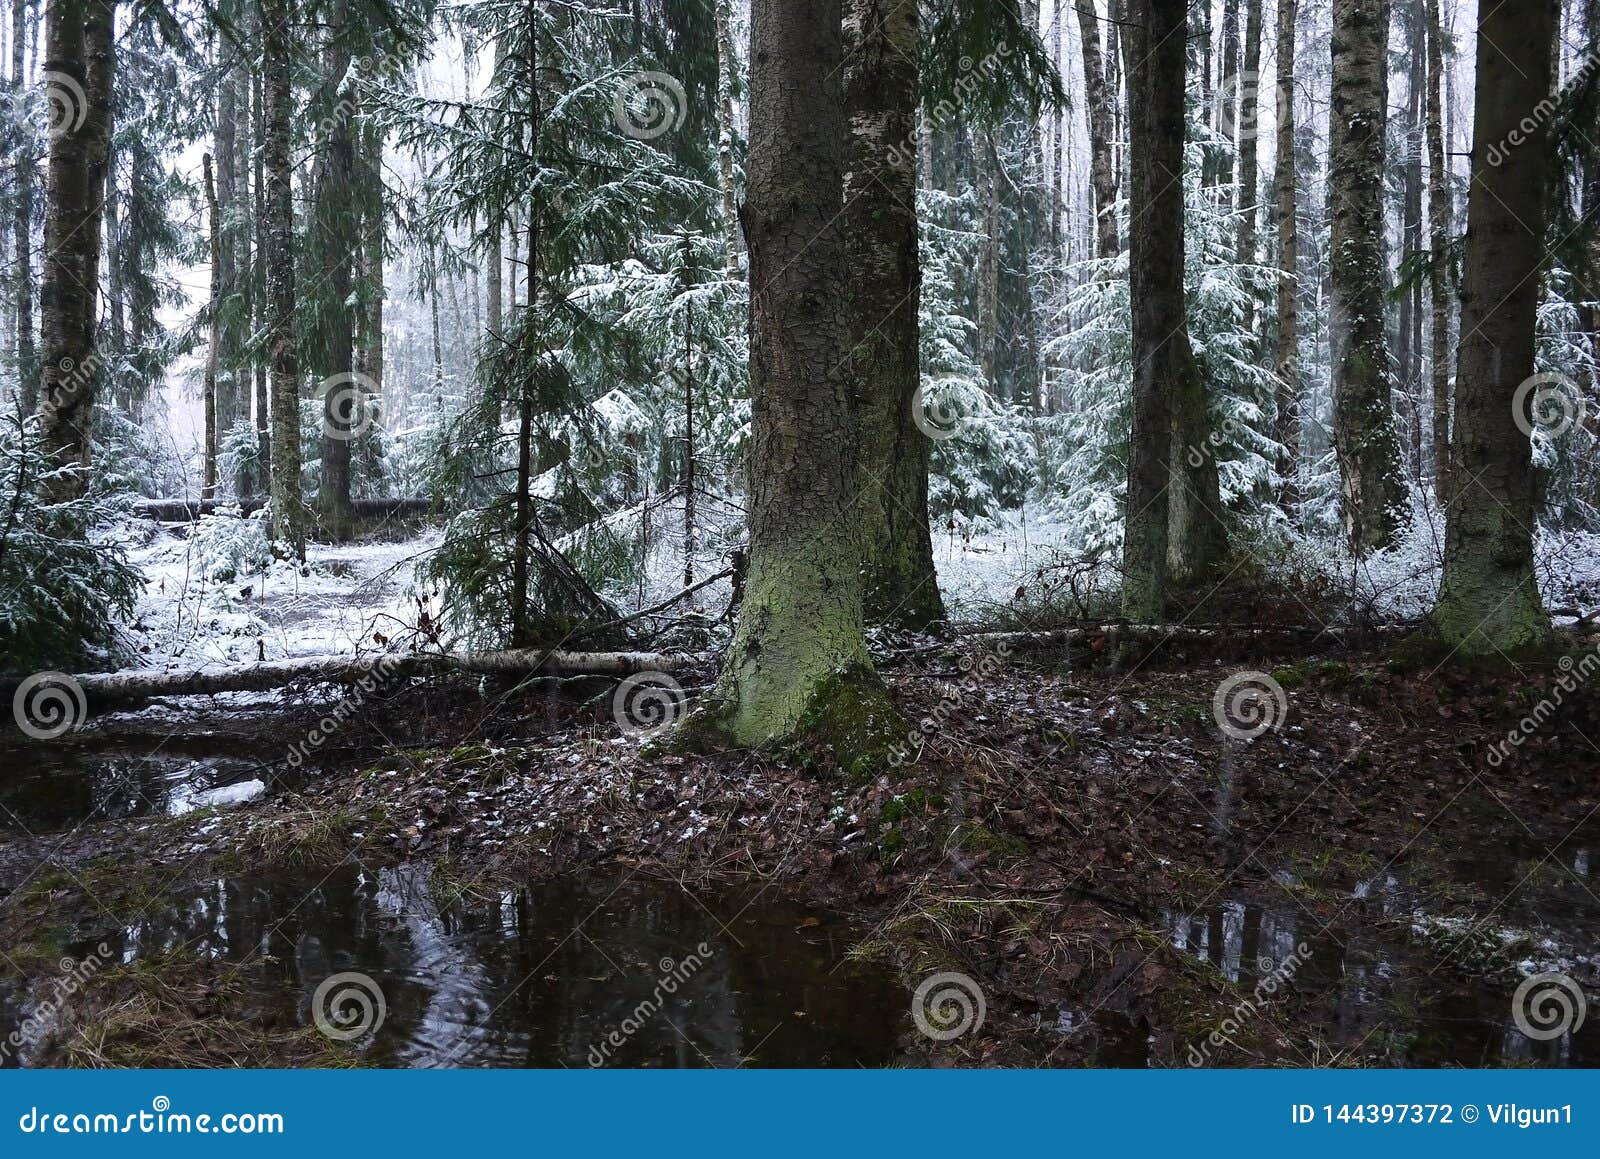 snow falls in the forest with trees. intense snow instantly covers the surface of the forest and tree branches with a layer of sno